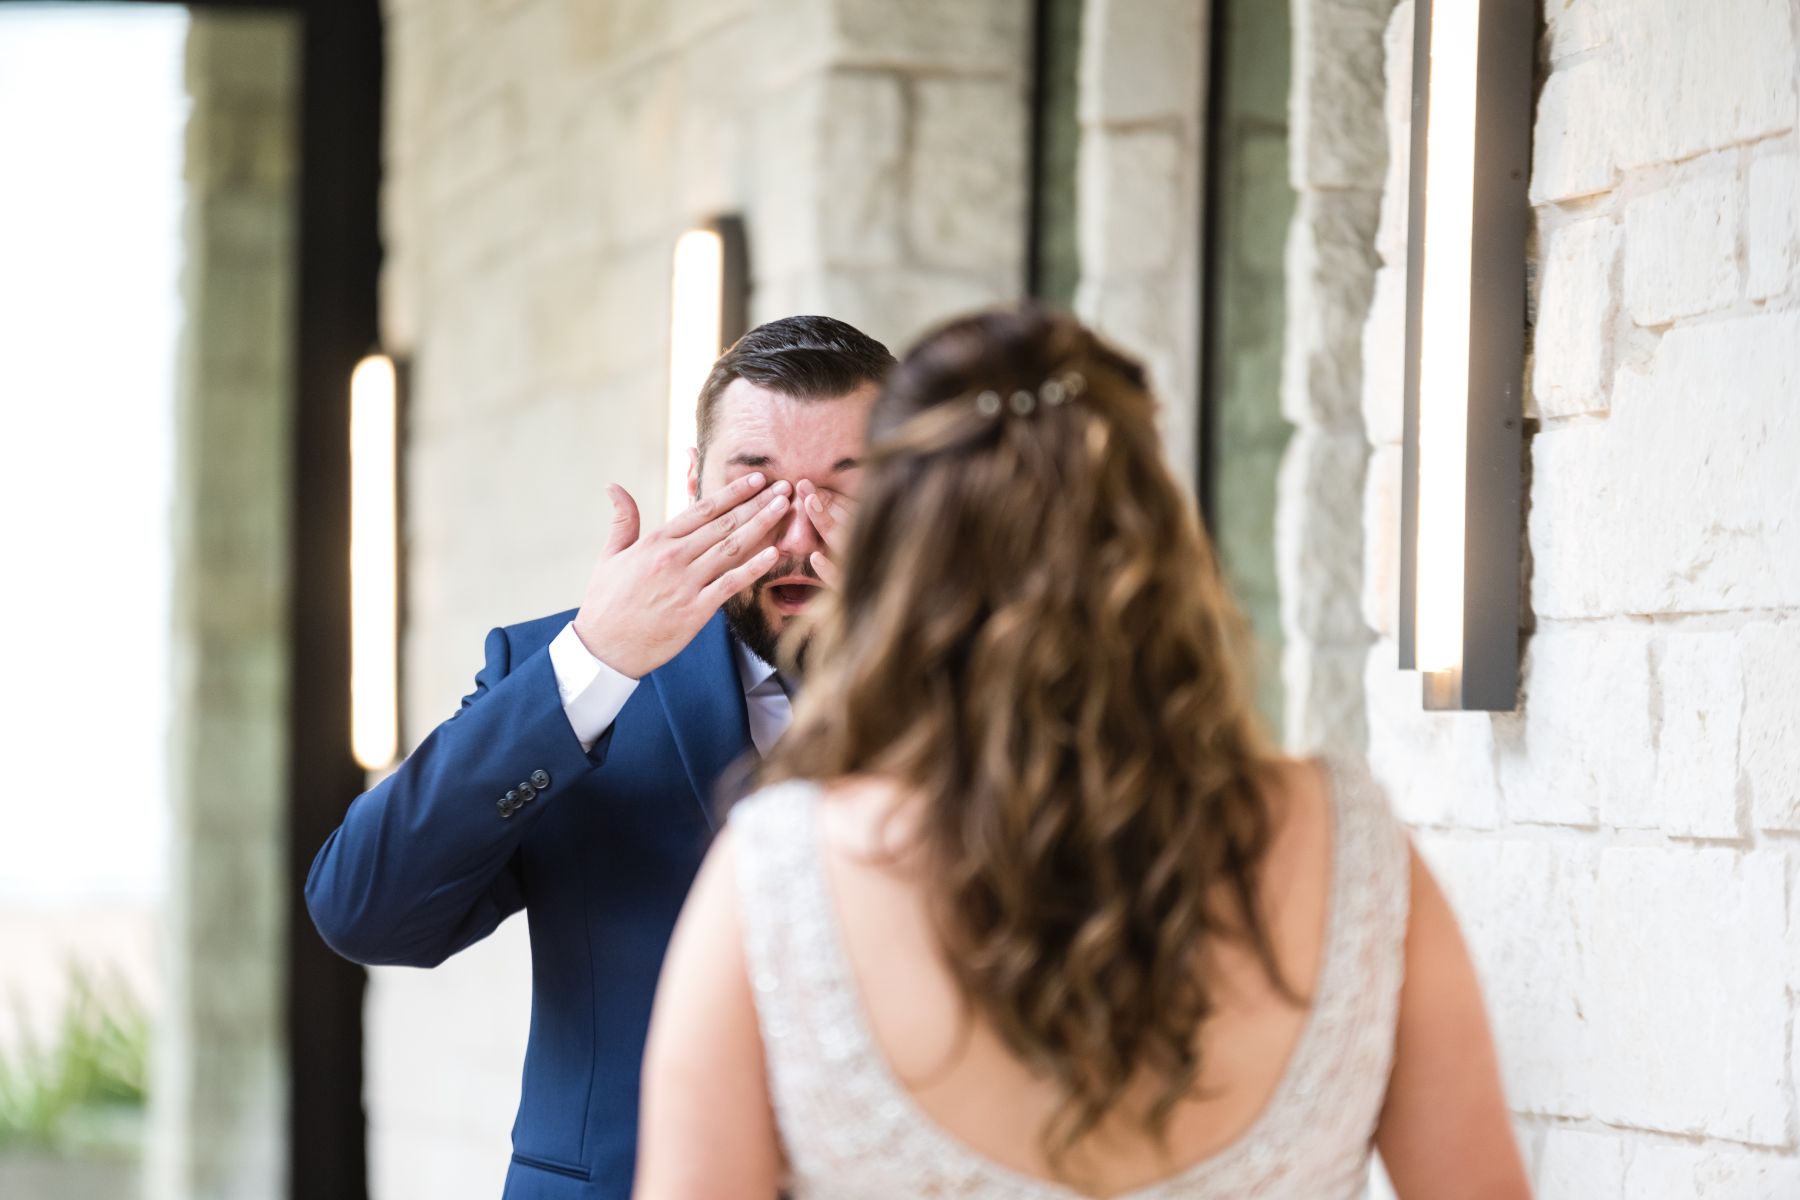 Groom is wiping his tears from his eyes as he takes a first look of his bride on their wedding day at Stonehouse Villa.